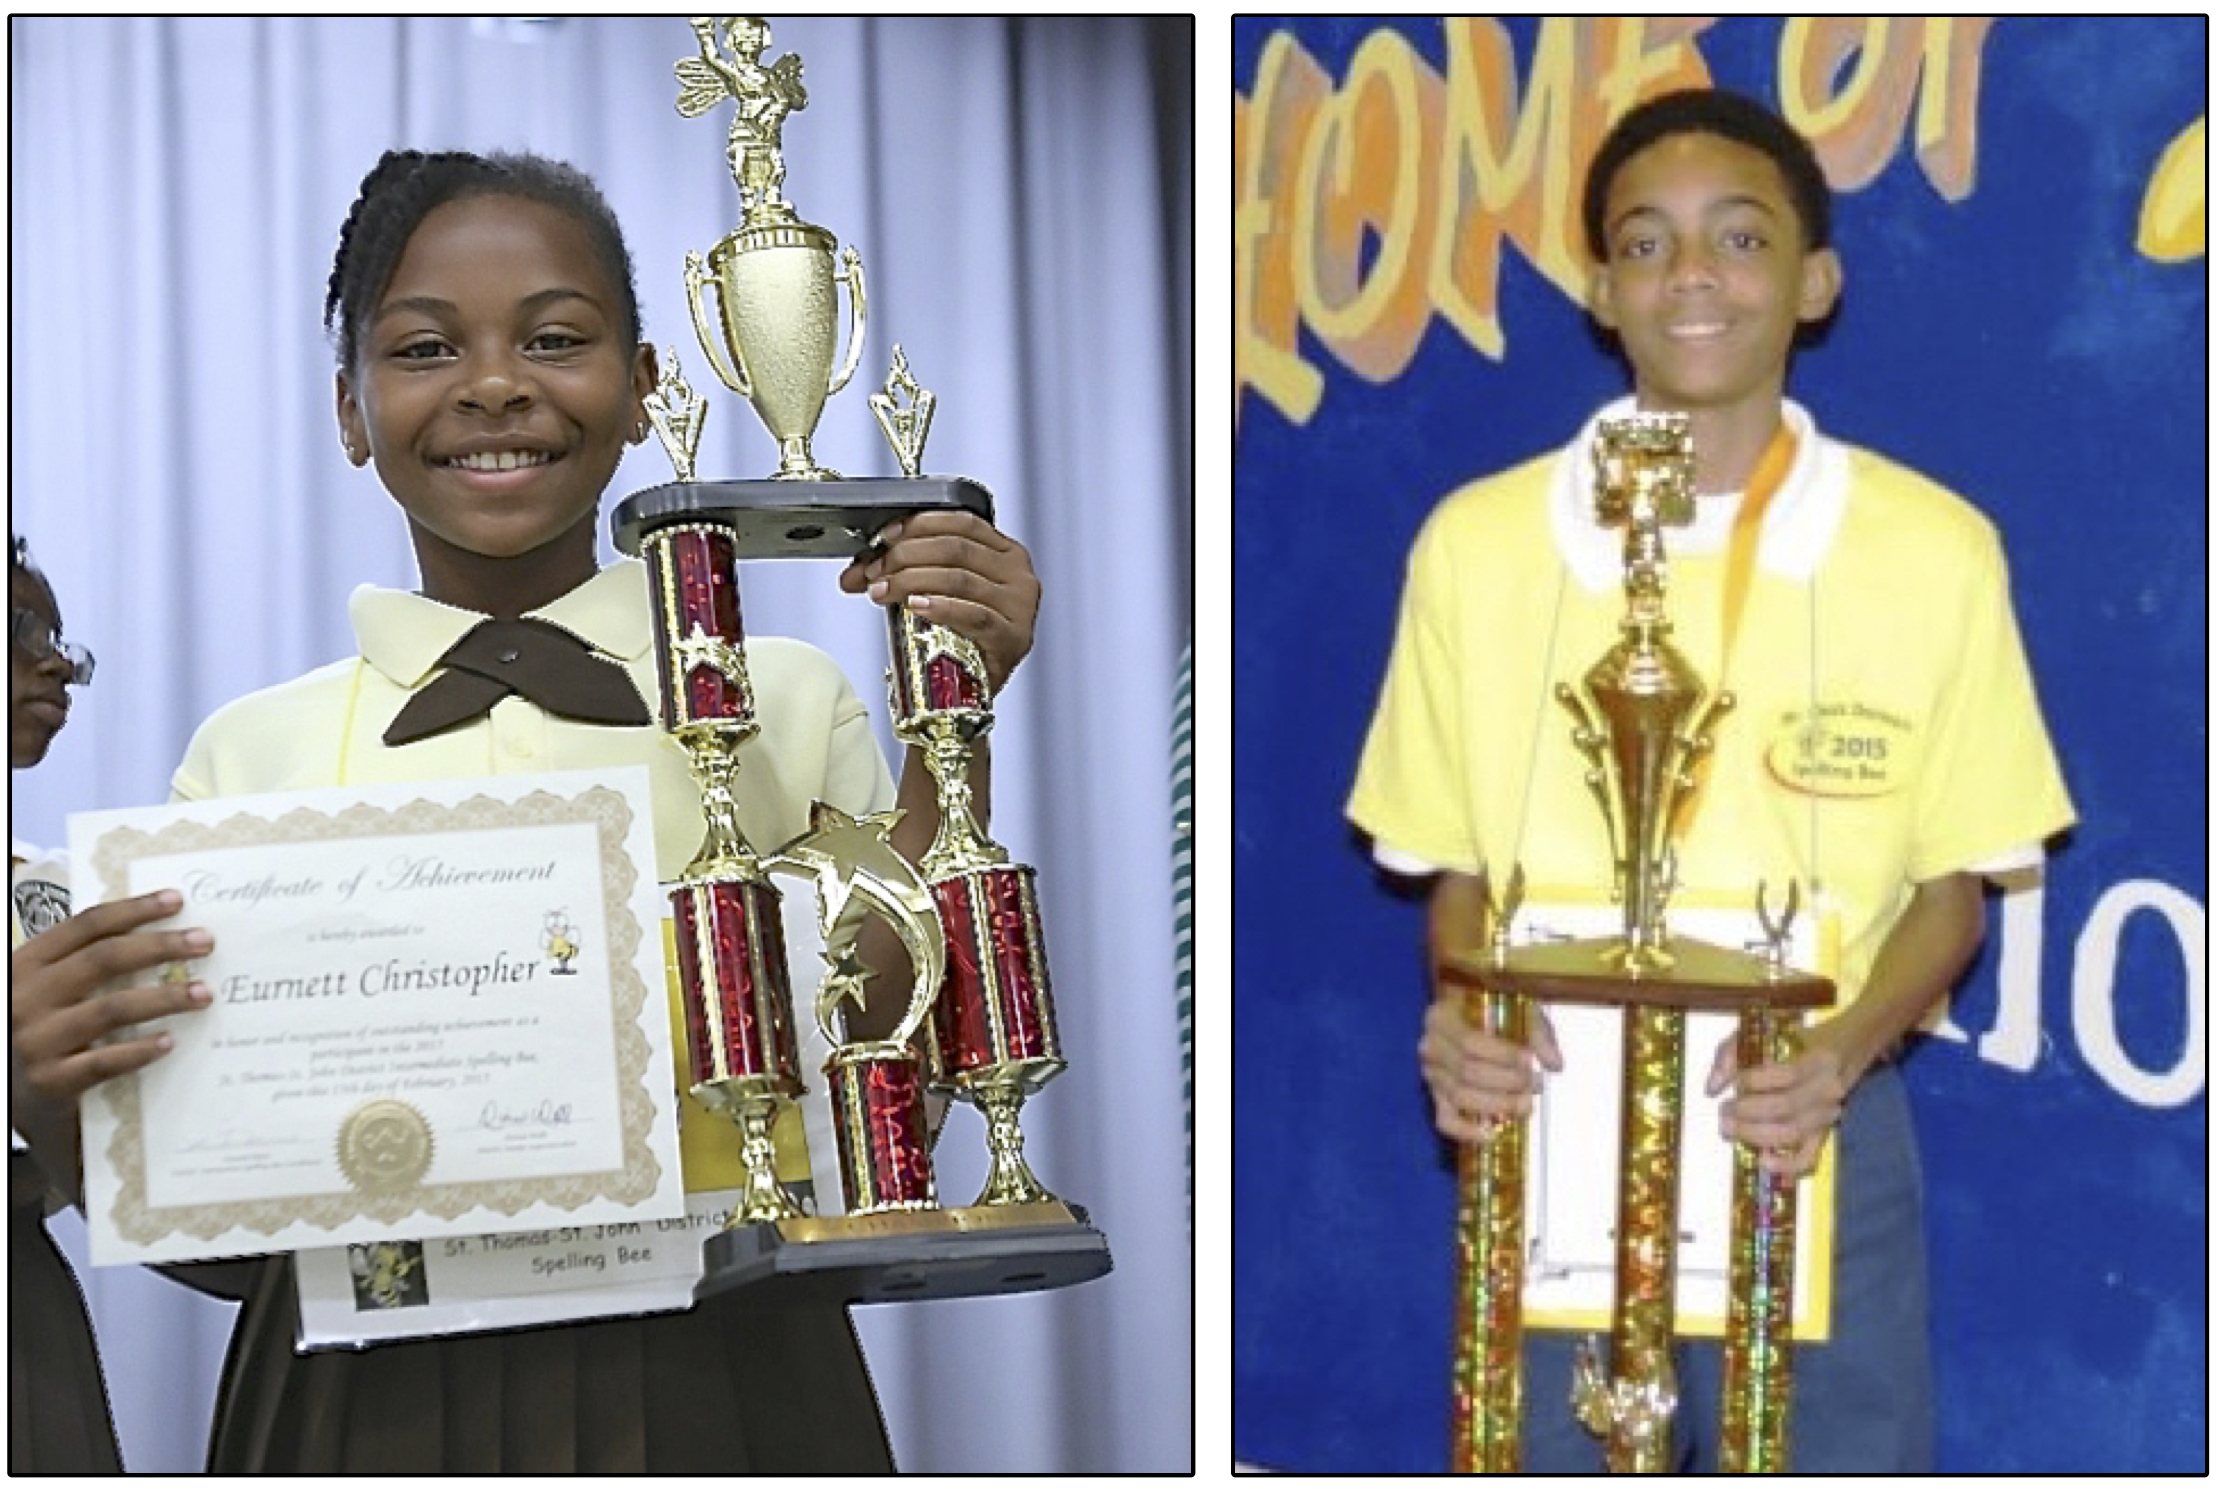 Eurnett Christopher, left, and Khaien Donawa hoist their trophies won in Friday's district spelling bees.